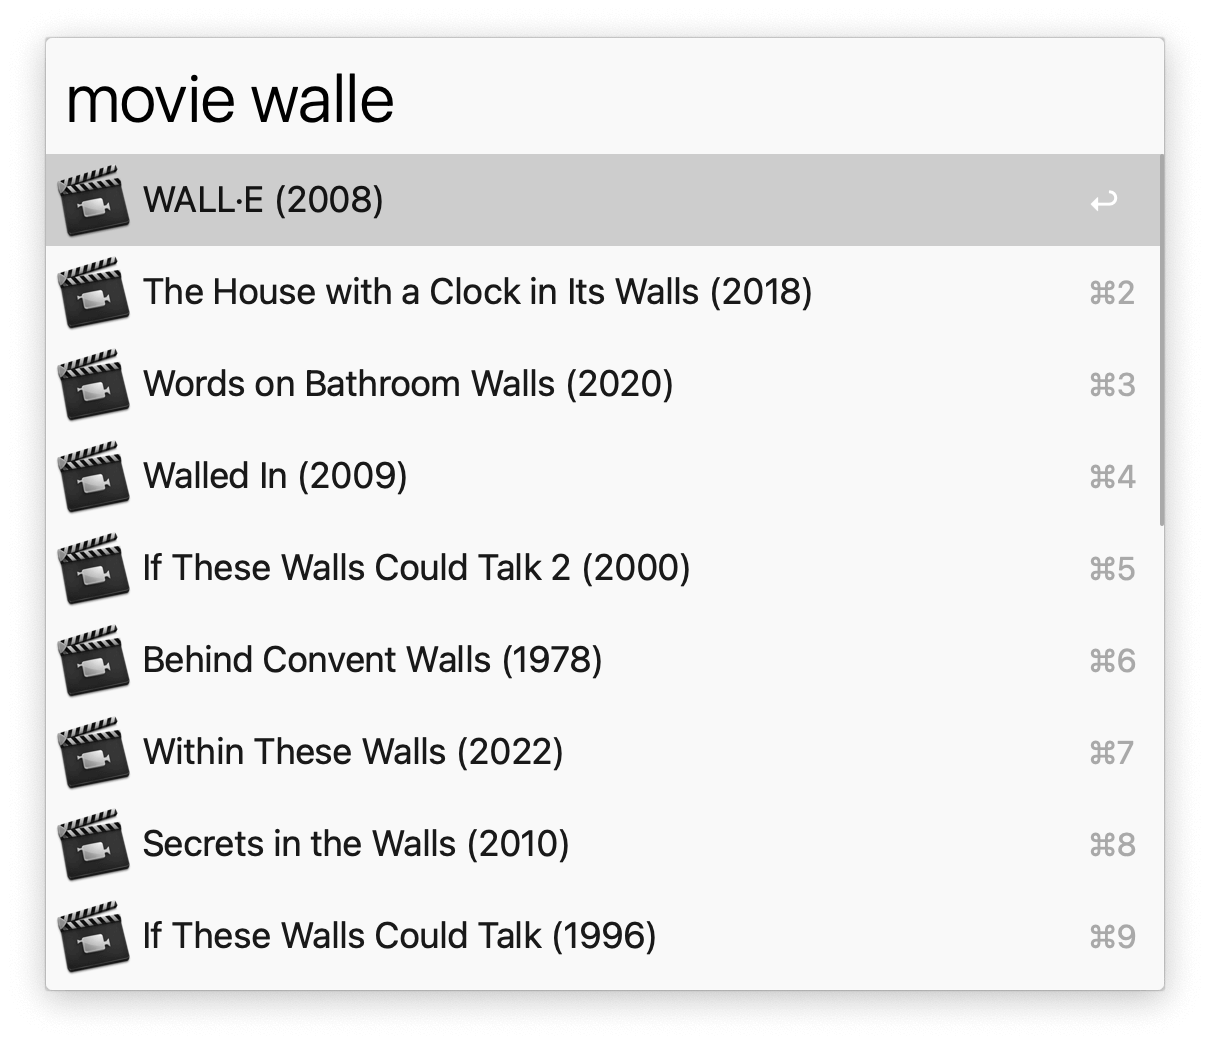 Alfred search for movie walle